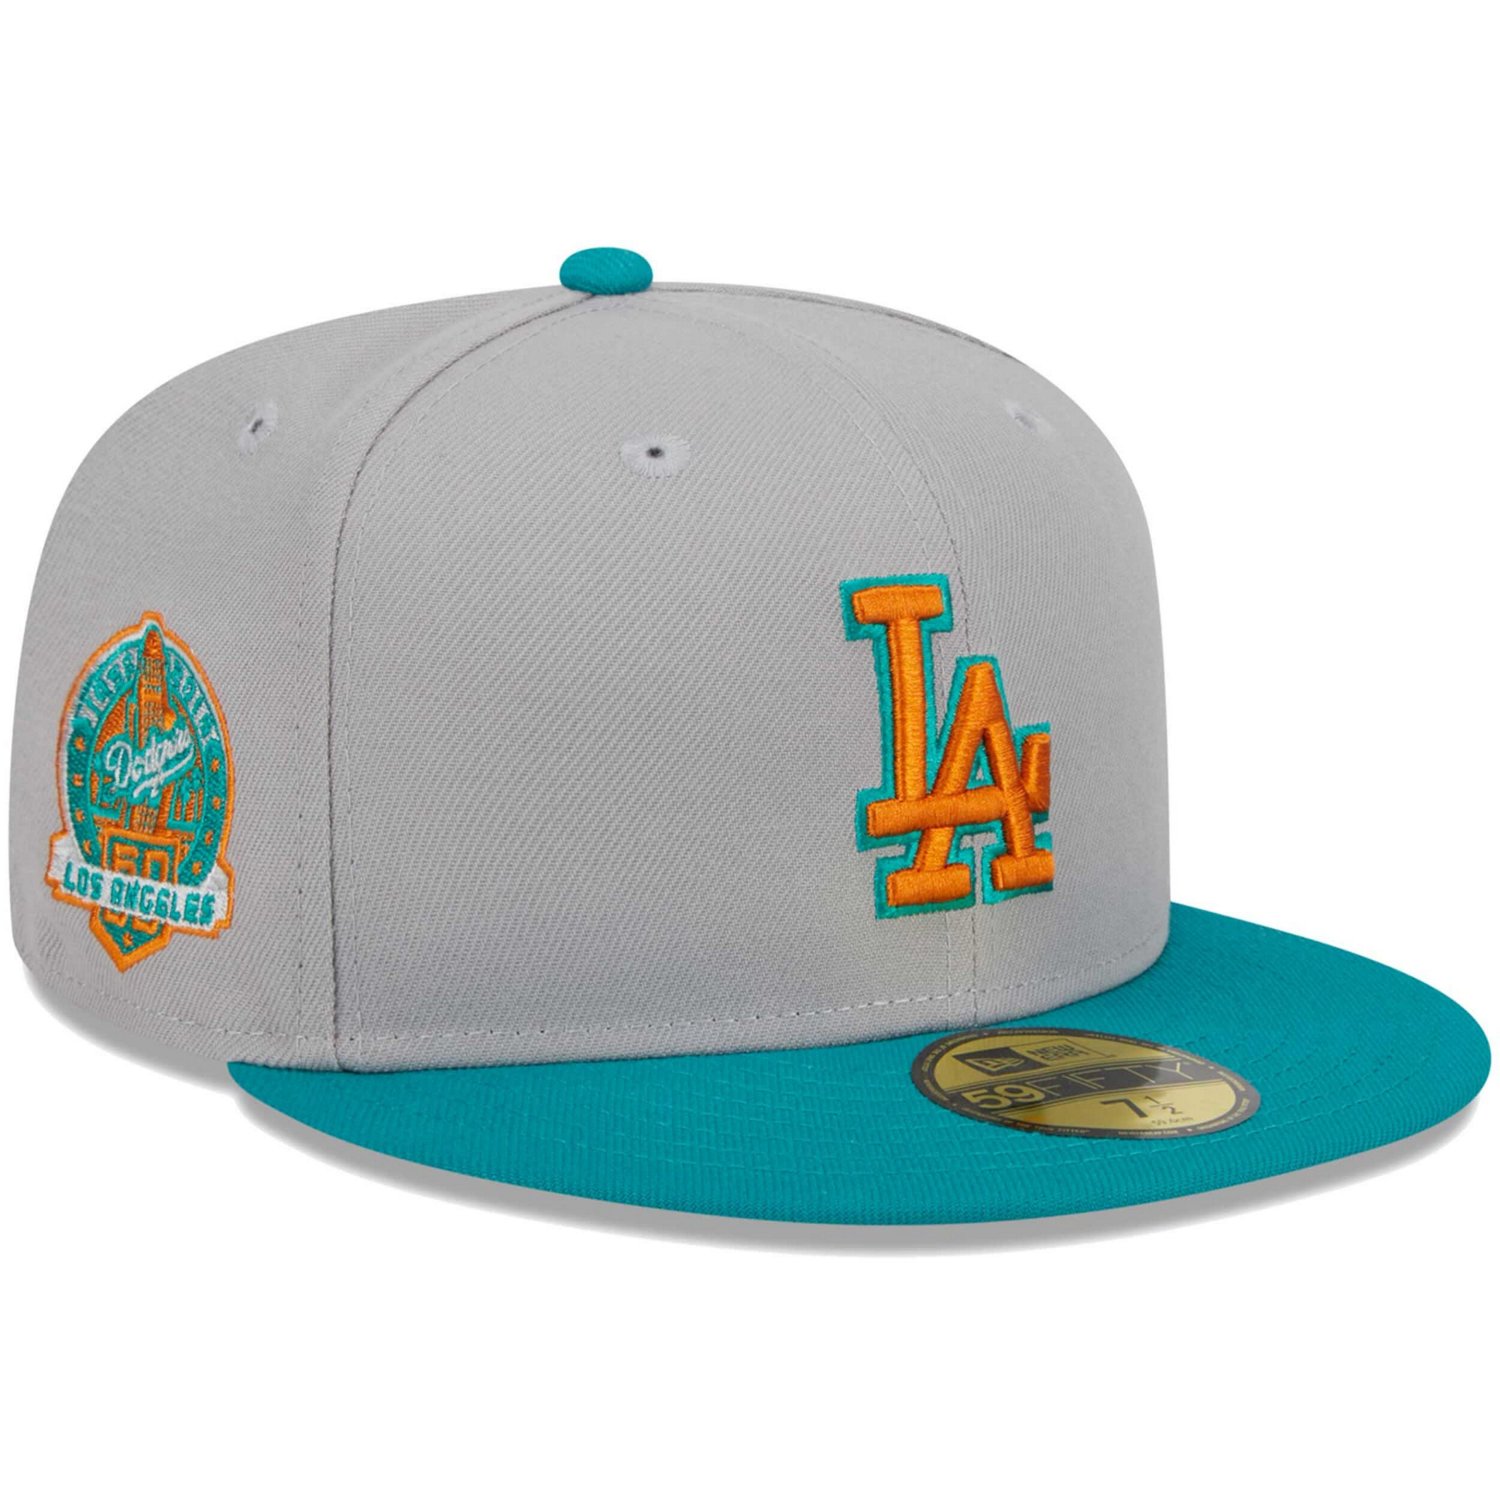 New Era / Los Angeles Dodgers 59FIFTY Fitted Hat